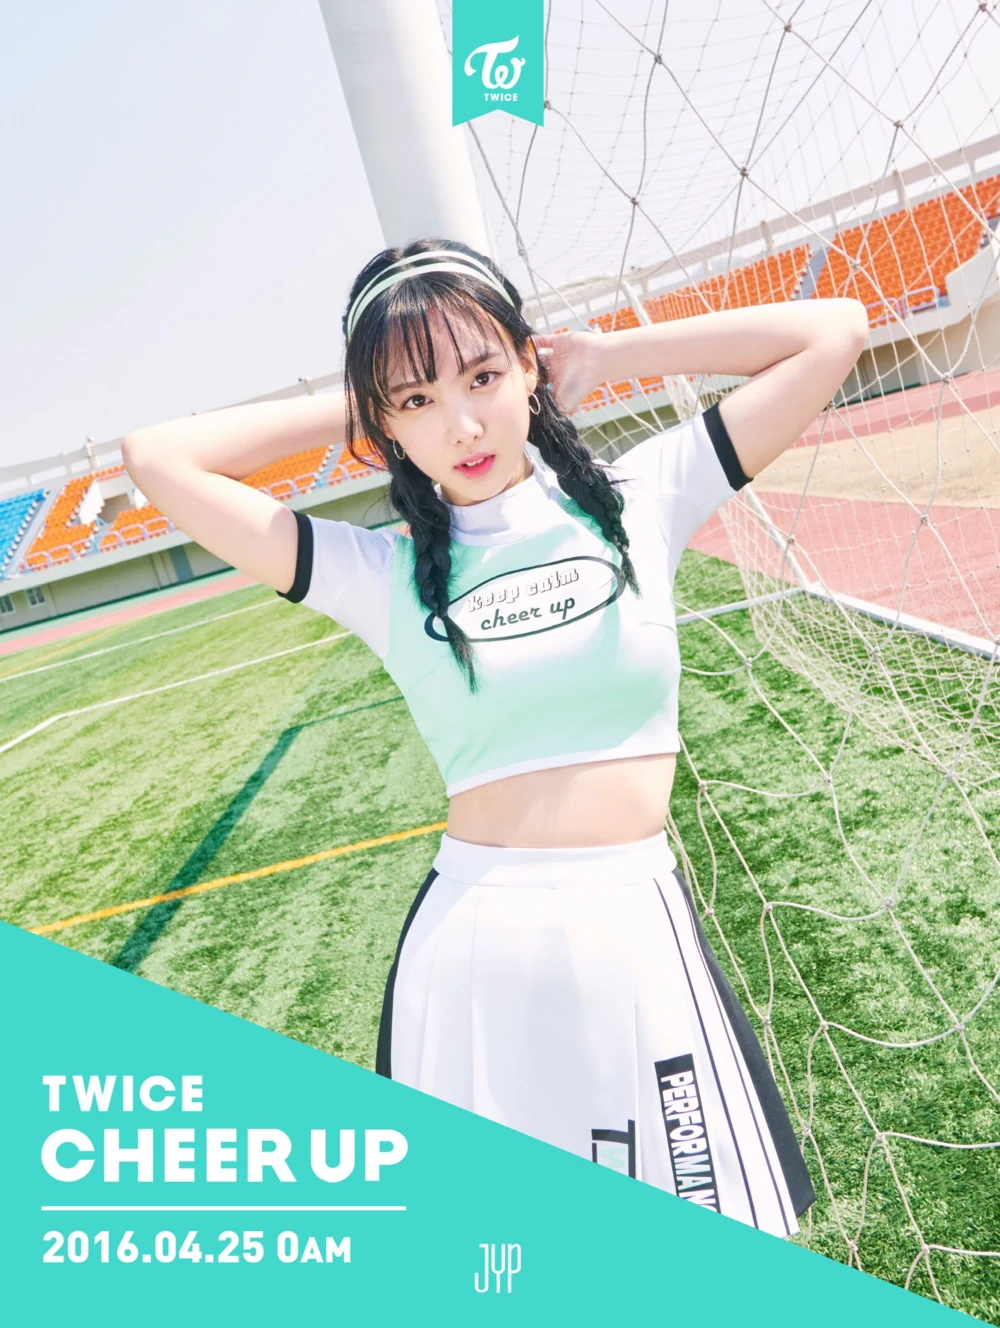 Twice Page 2 Nayeon Concept Teaser Picture Image Photo Kpop K-Concept 1